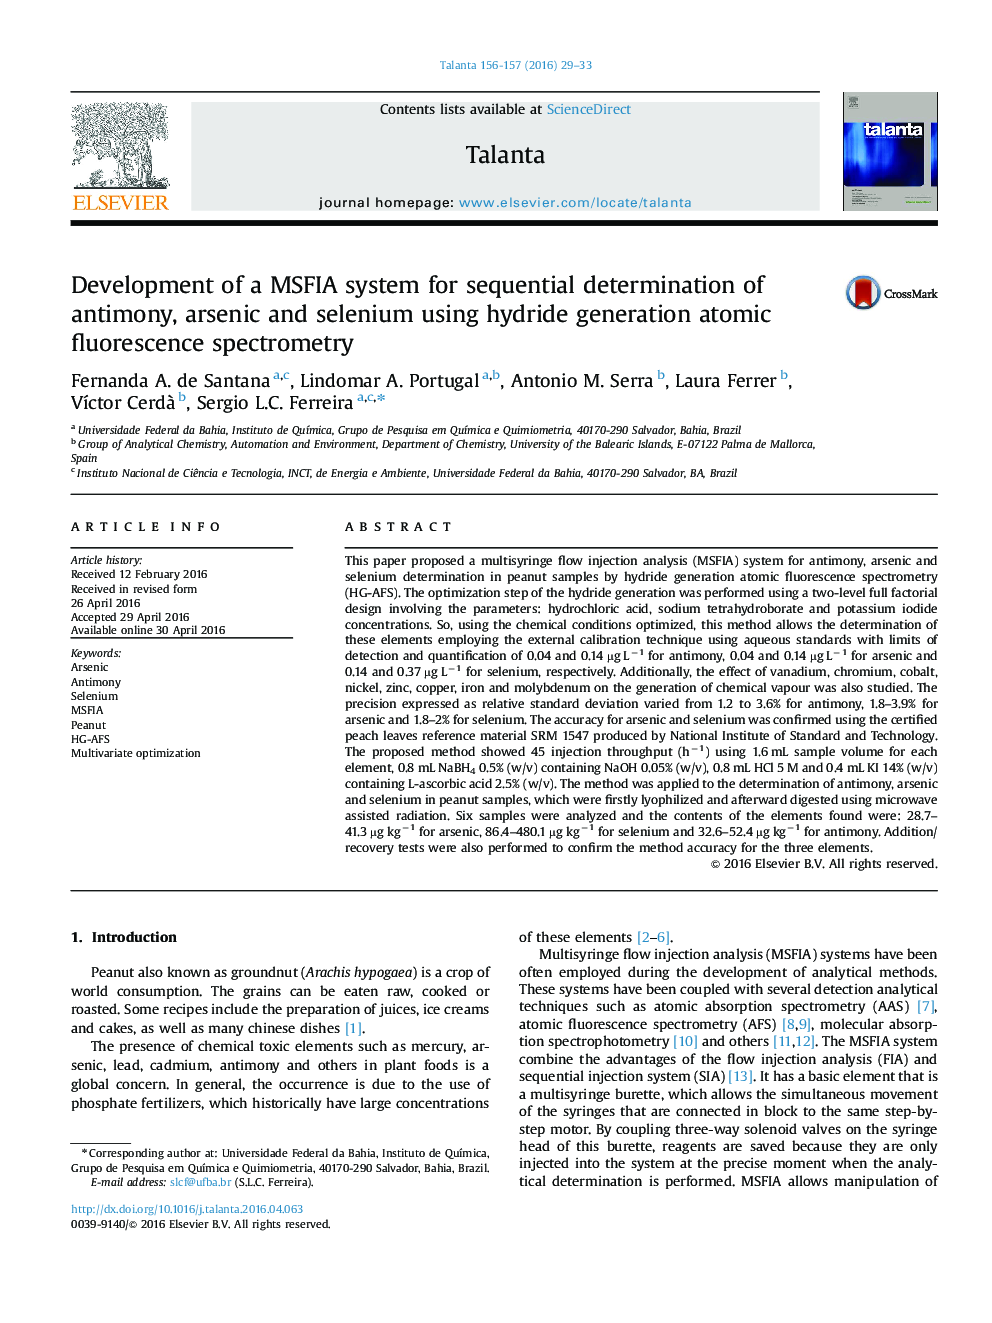 Development of a MSFIA system for sequential determination of antimony, arsenic and selenium using hydride generation atomic fluorescence spectrometry